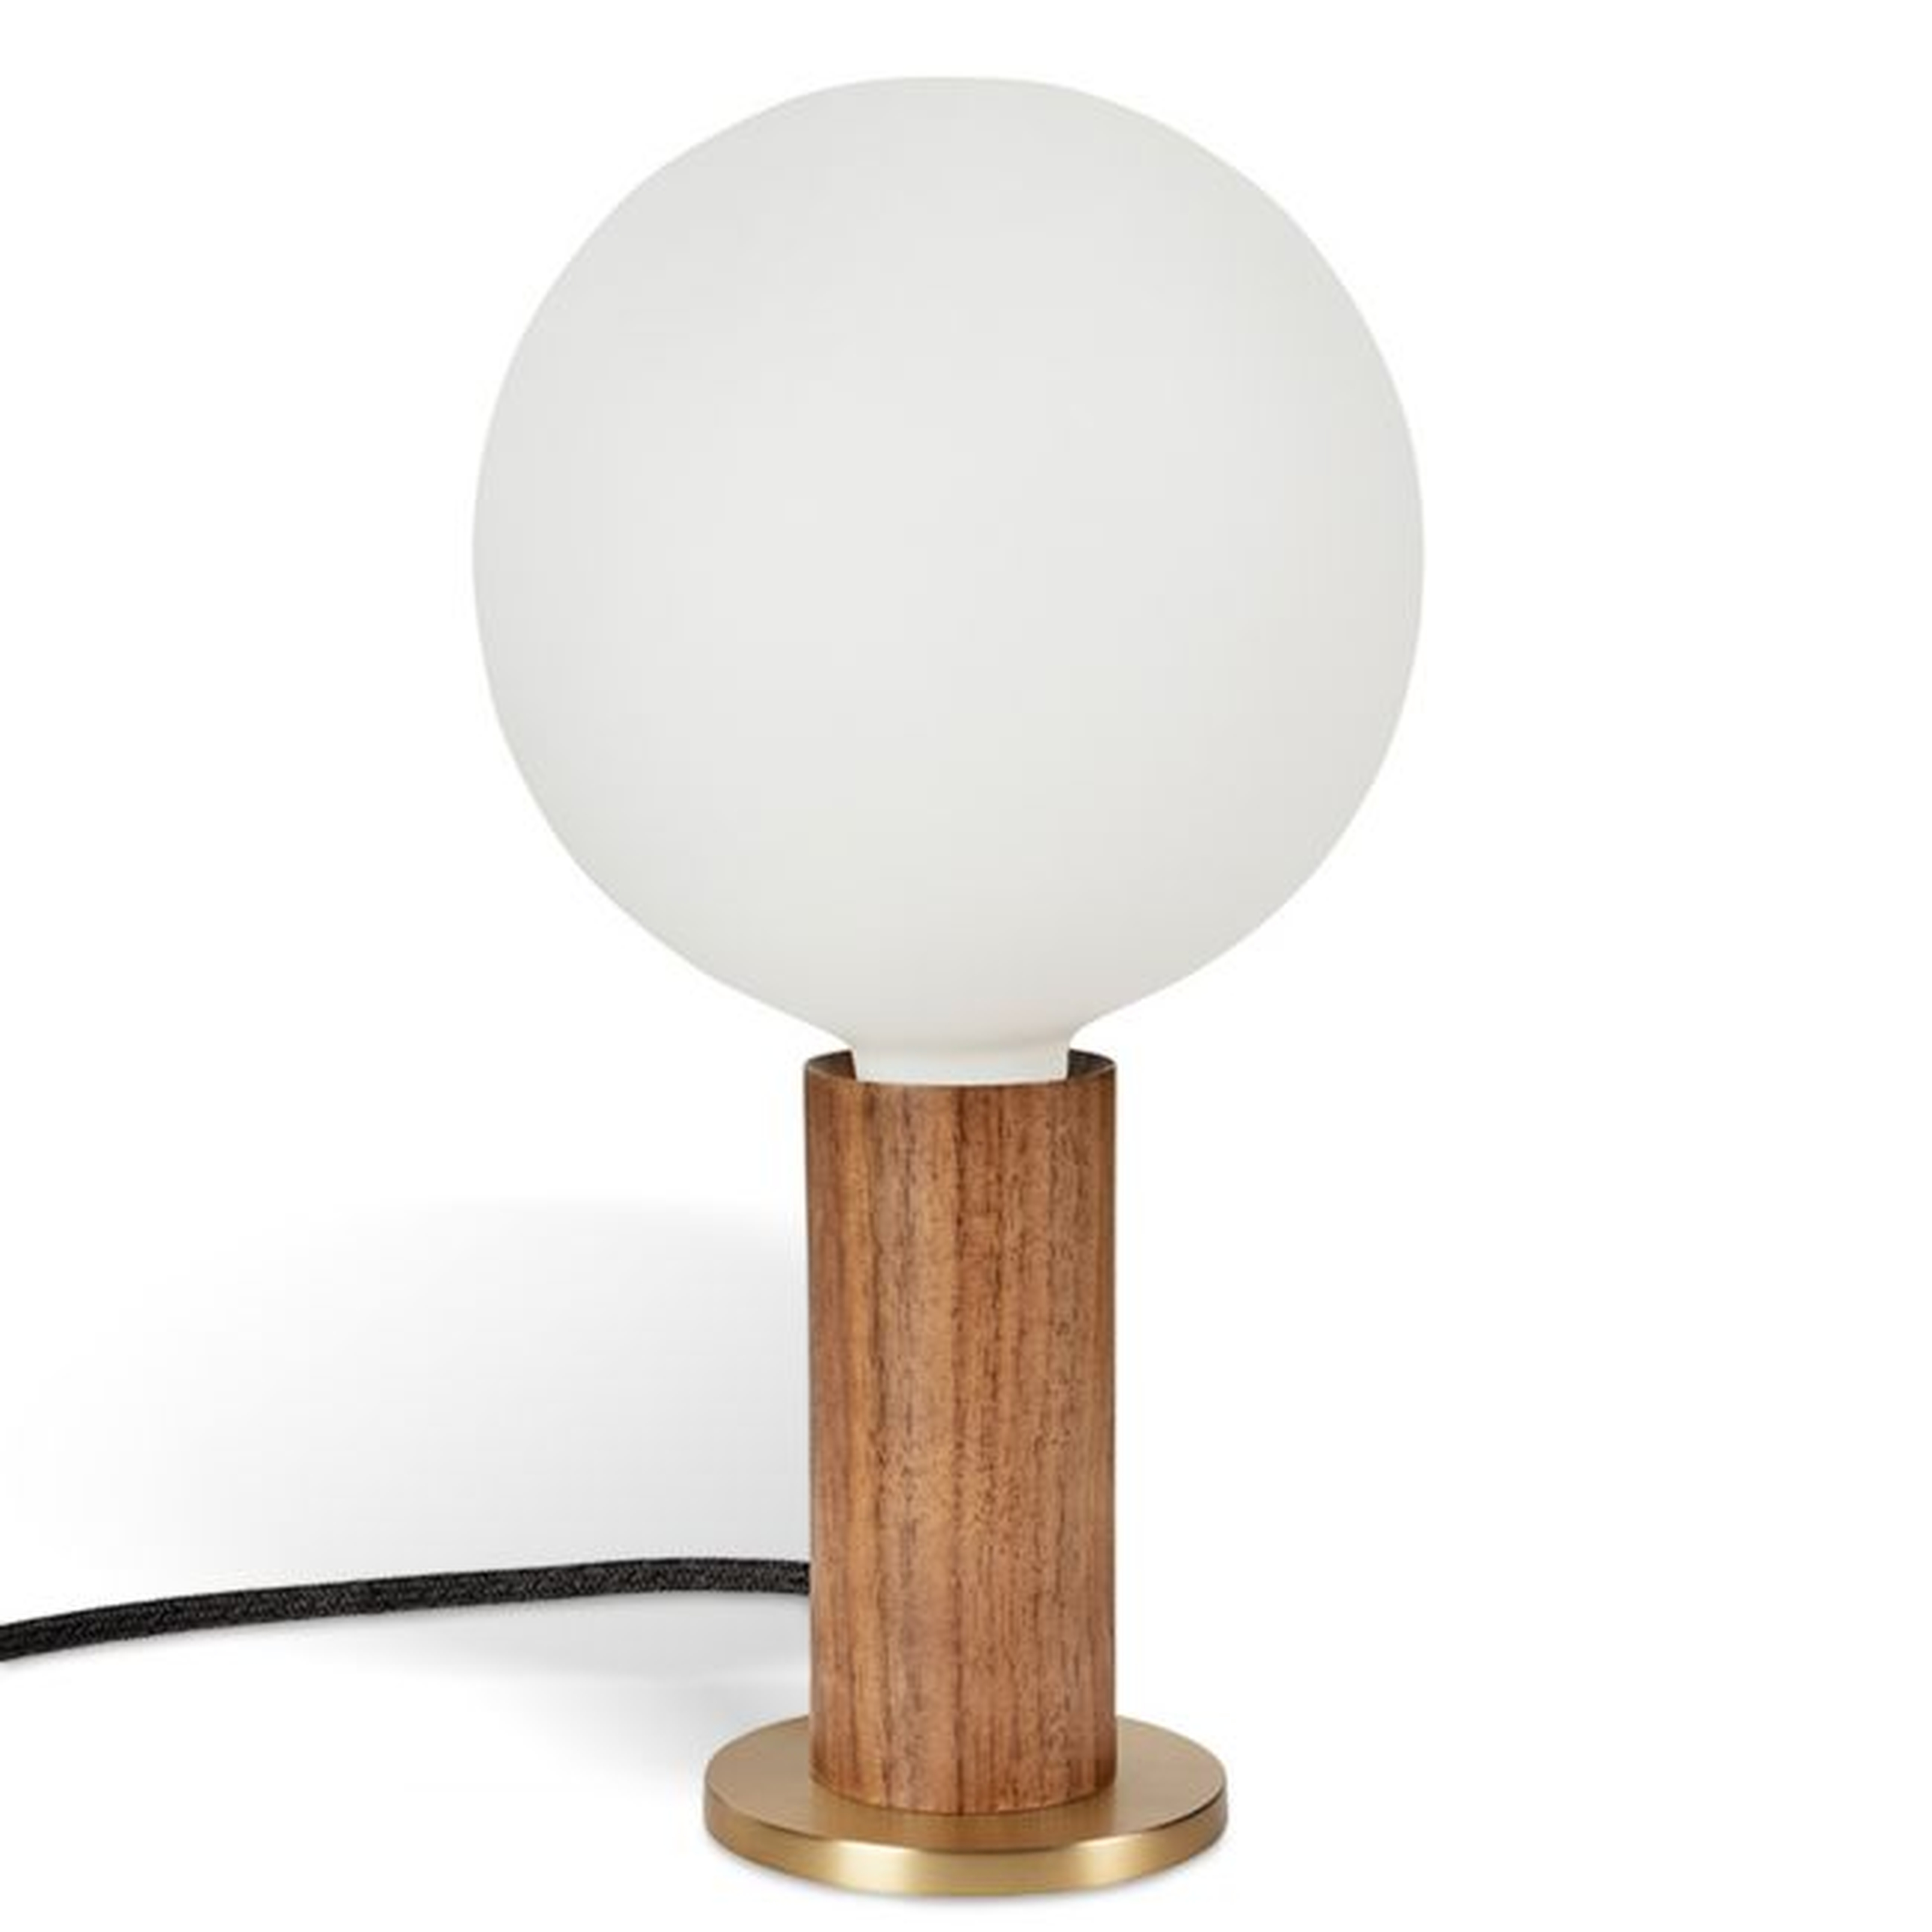 Tala Walnut Table Lamp with Sphere IV Bulb - Crate and Barrel